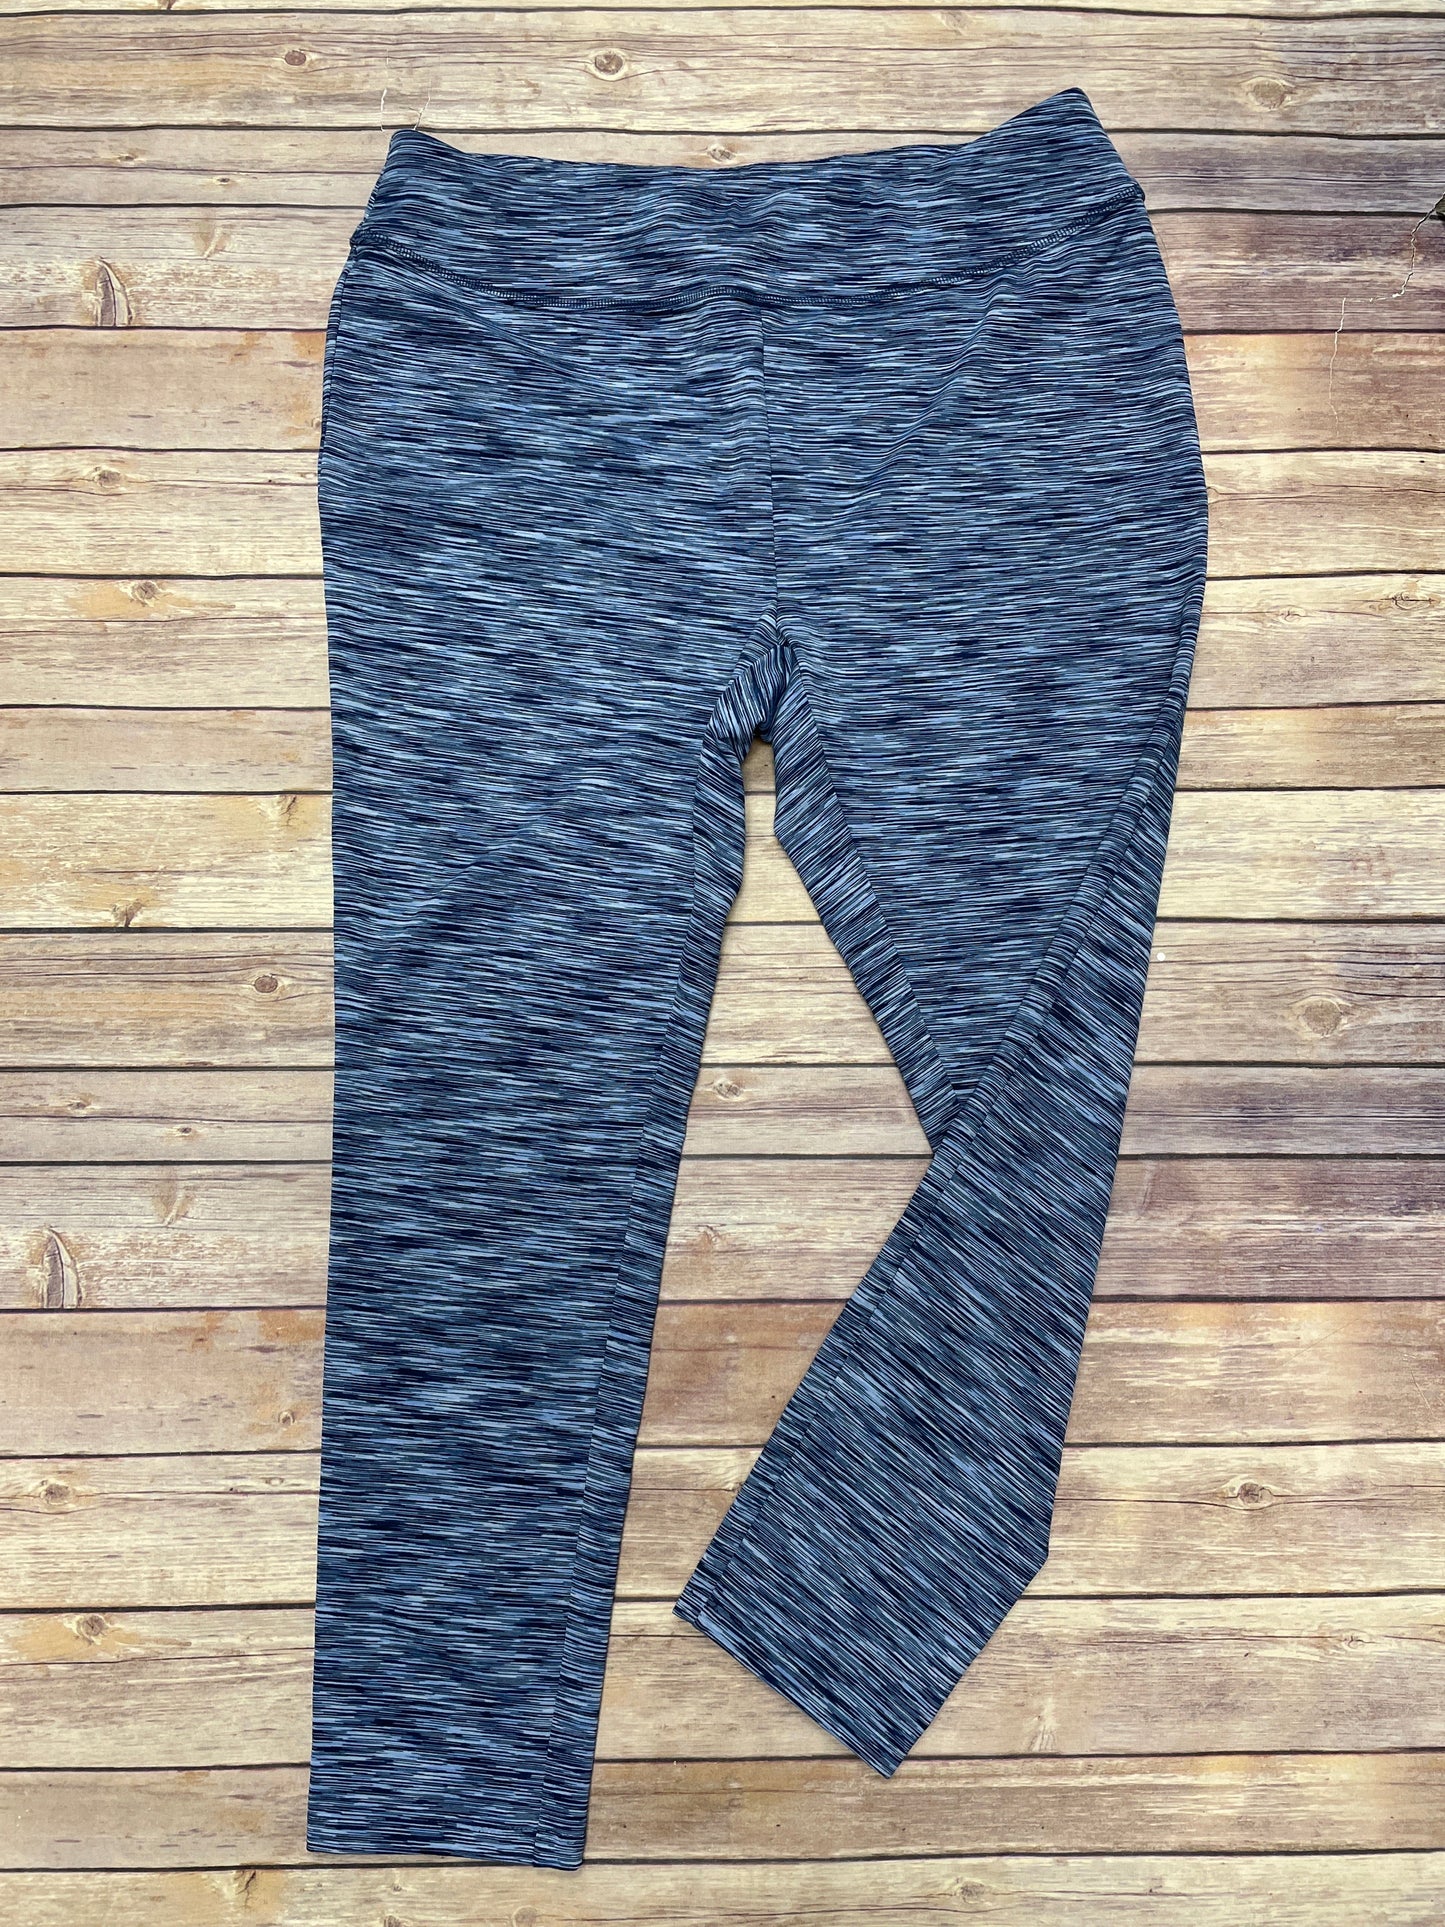 Athletic Pants 2pc By Zenergy By Chicos  Size: L